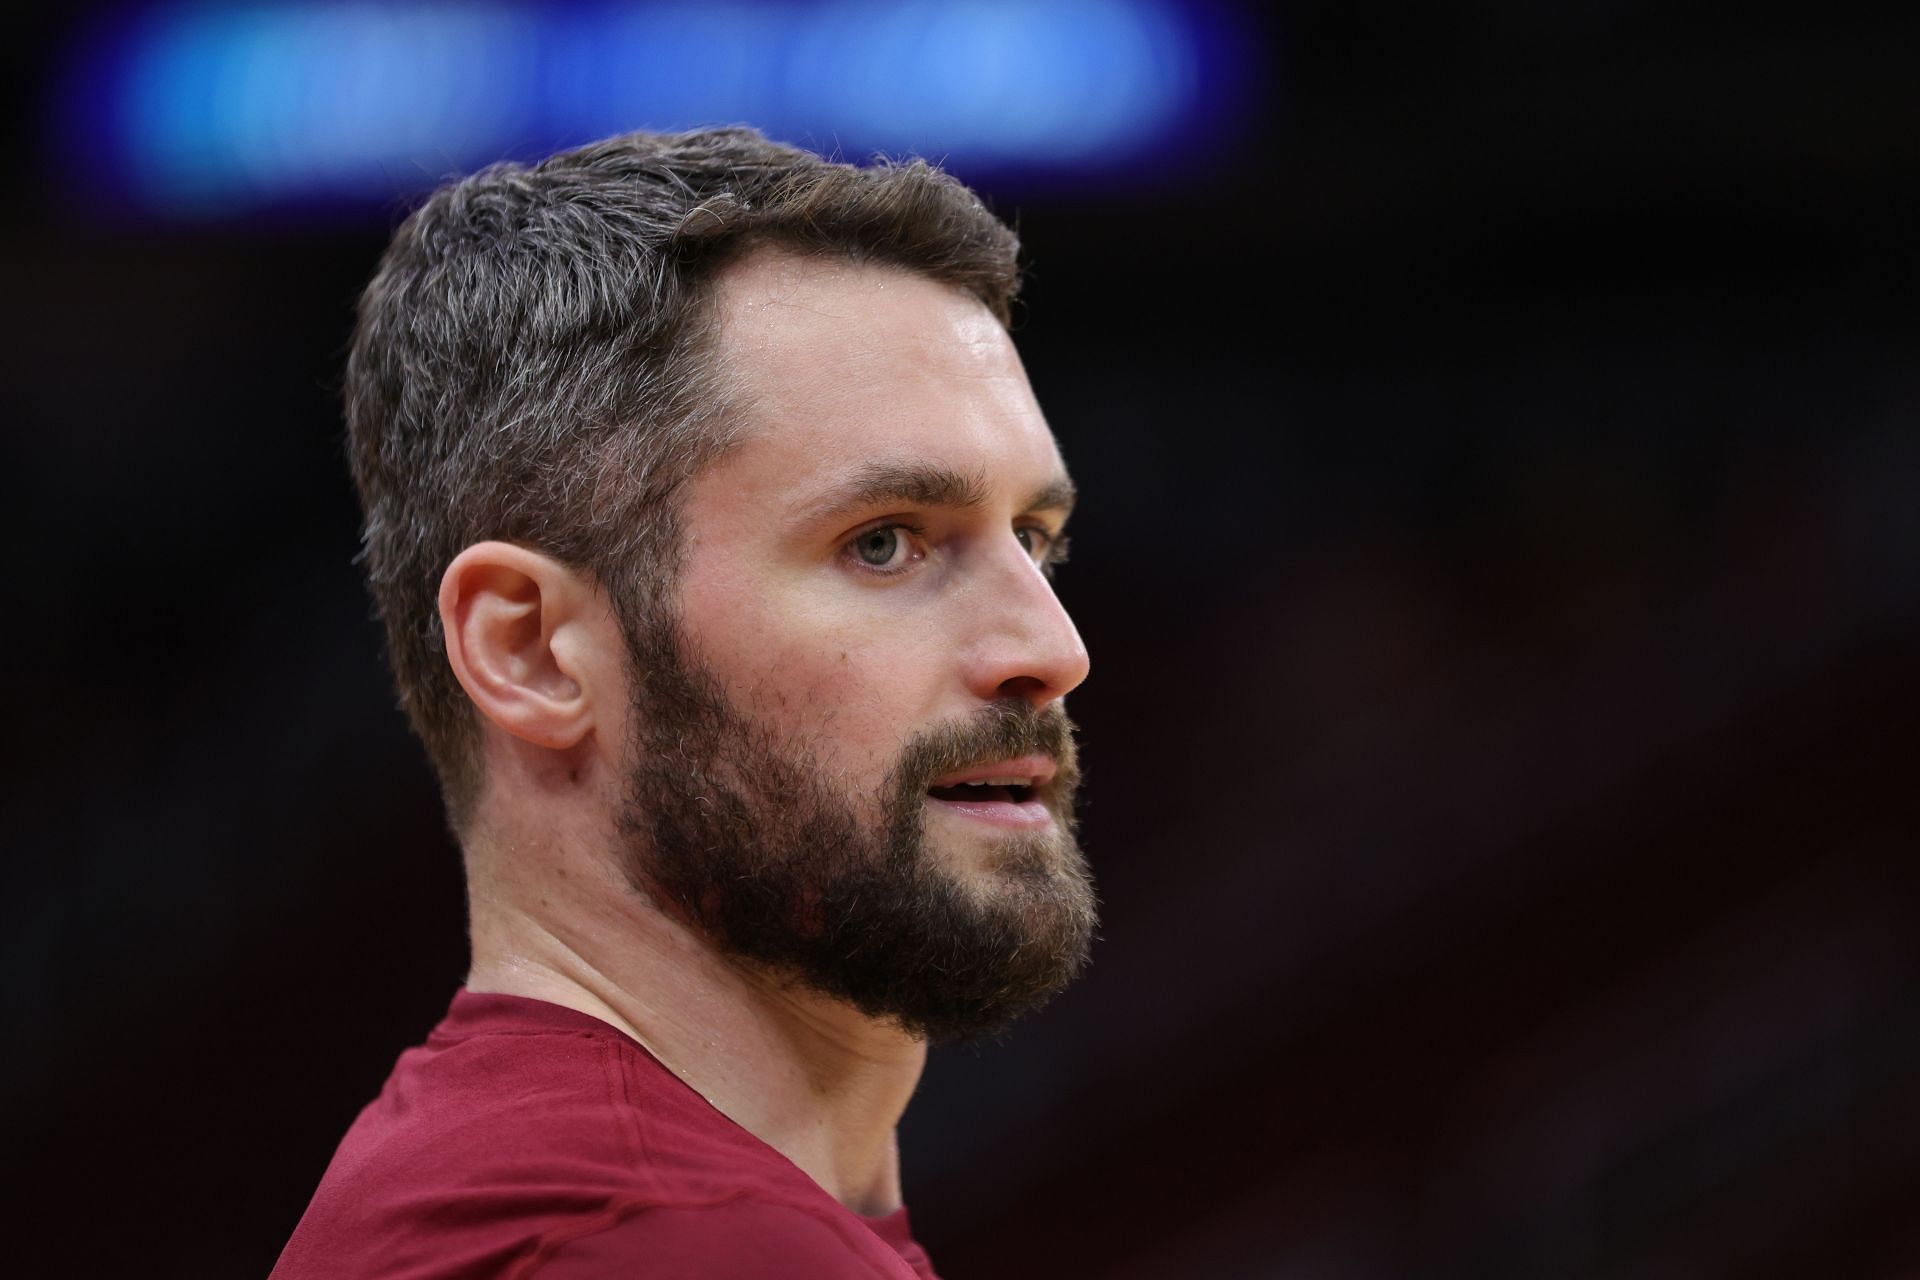 Cleveland Cavaliers veteran Kevin Love continues to impress in the Sixth Man of the Year race.